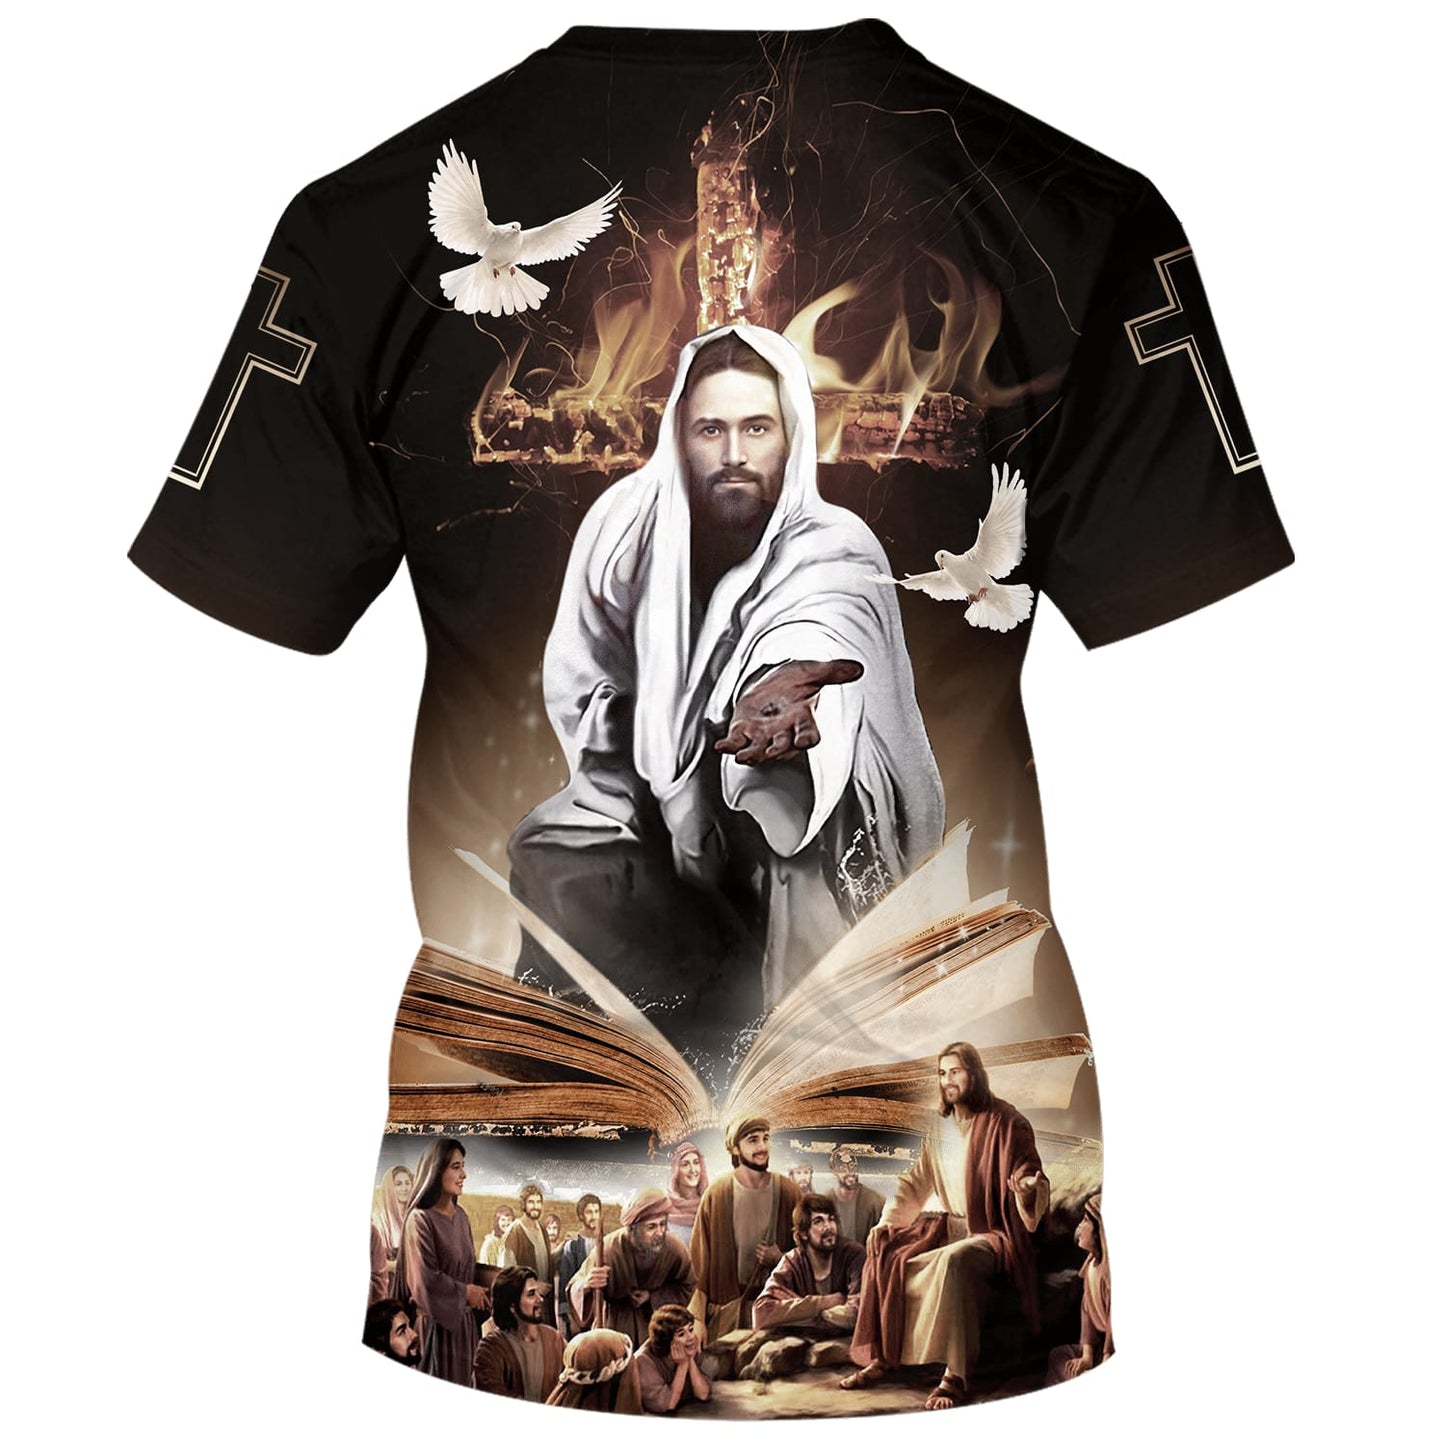 Jesus With His Disciples 3d Shirts - Christian T Shirts For Men And Women